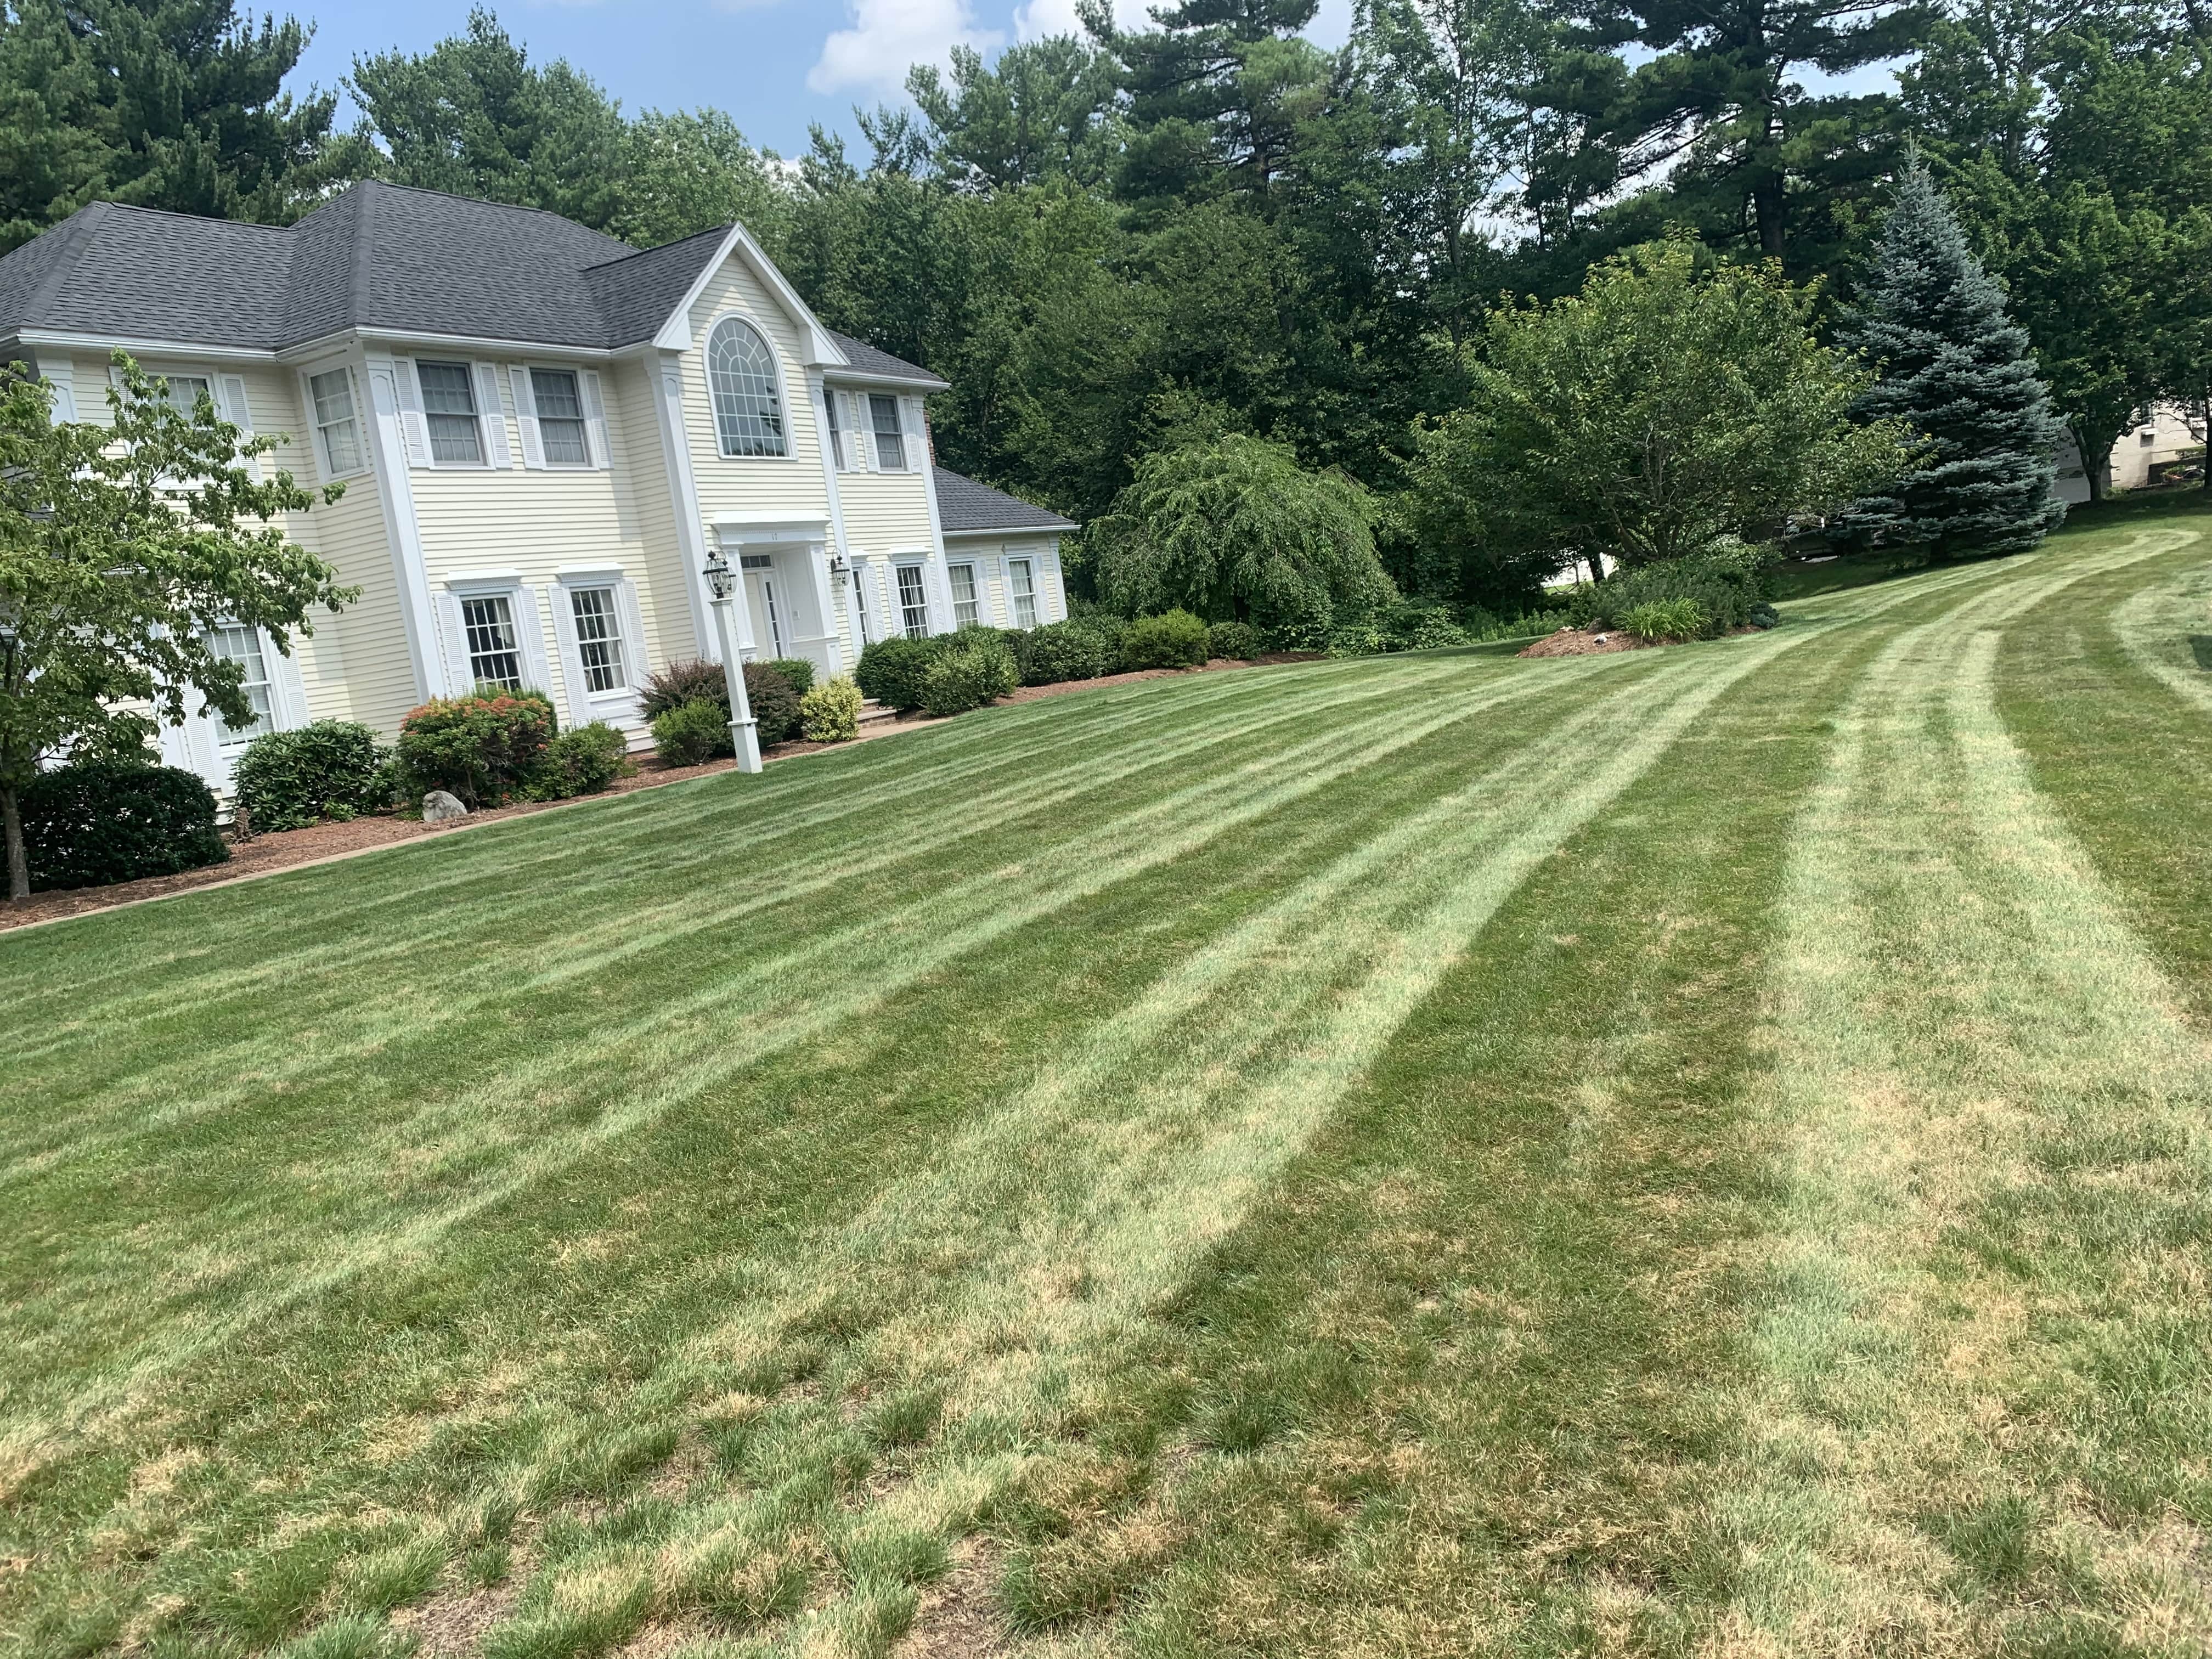 Alvarez Landscaping can handle yards of all shapes, sizes, and conditions - this is a big one!

If you need a landscaper, look no further than Alvarez Landscaping, LLC!